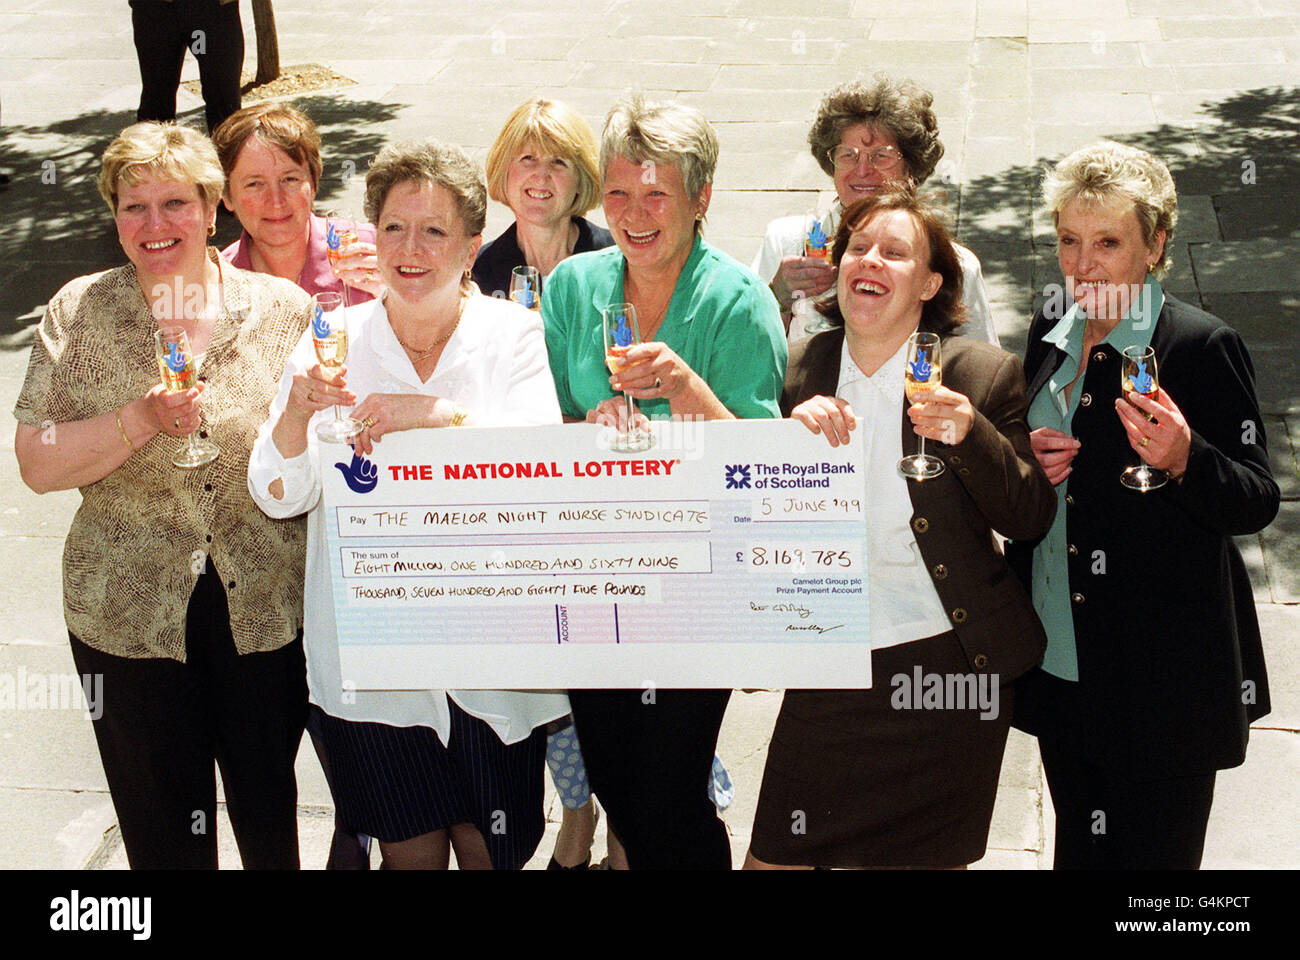 A syndincate of eight nurses from North Wales arrive in London to collect the winning cheque for 8,169,785 pounds from Camelot National Lottery. The winners are (l-r) C. Davies, C. Lovell, G. Churchill, Z. Zara Clarke, P. Williams, M. Story, A. Lewis and G. Jones. * Carol Davies, Carys Lovell (51) Glenys Churchill ( 61) Zara Clarke ( 51)Pearl Williams (56) Menna Story ( 51) Amanda Lewis (33) and Glenys Jones (49). Stock Photo